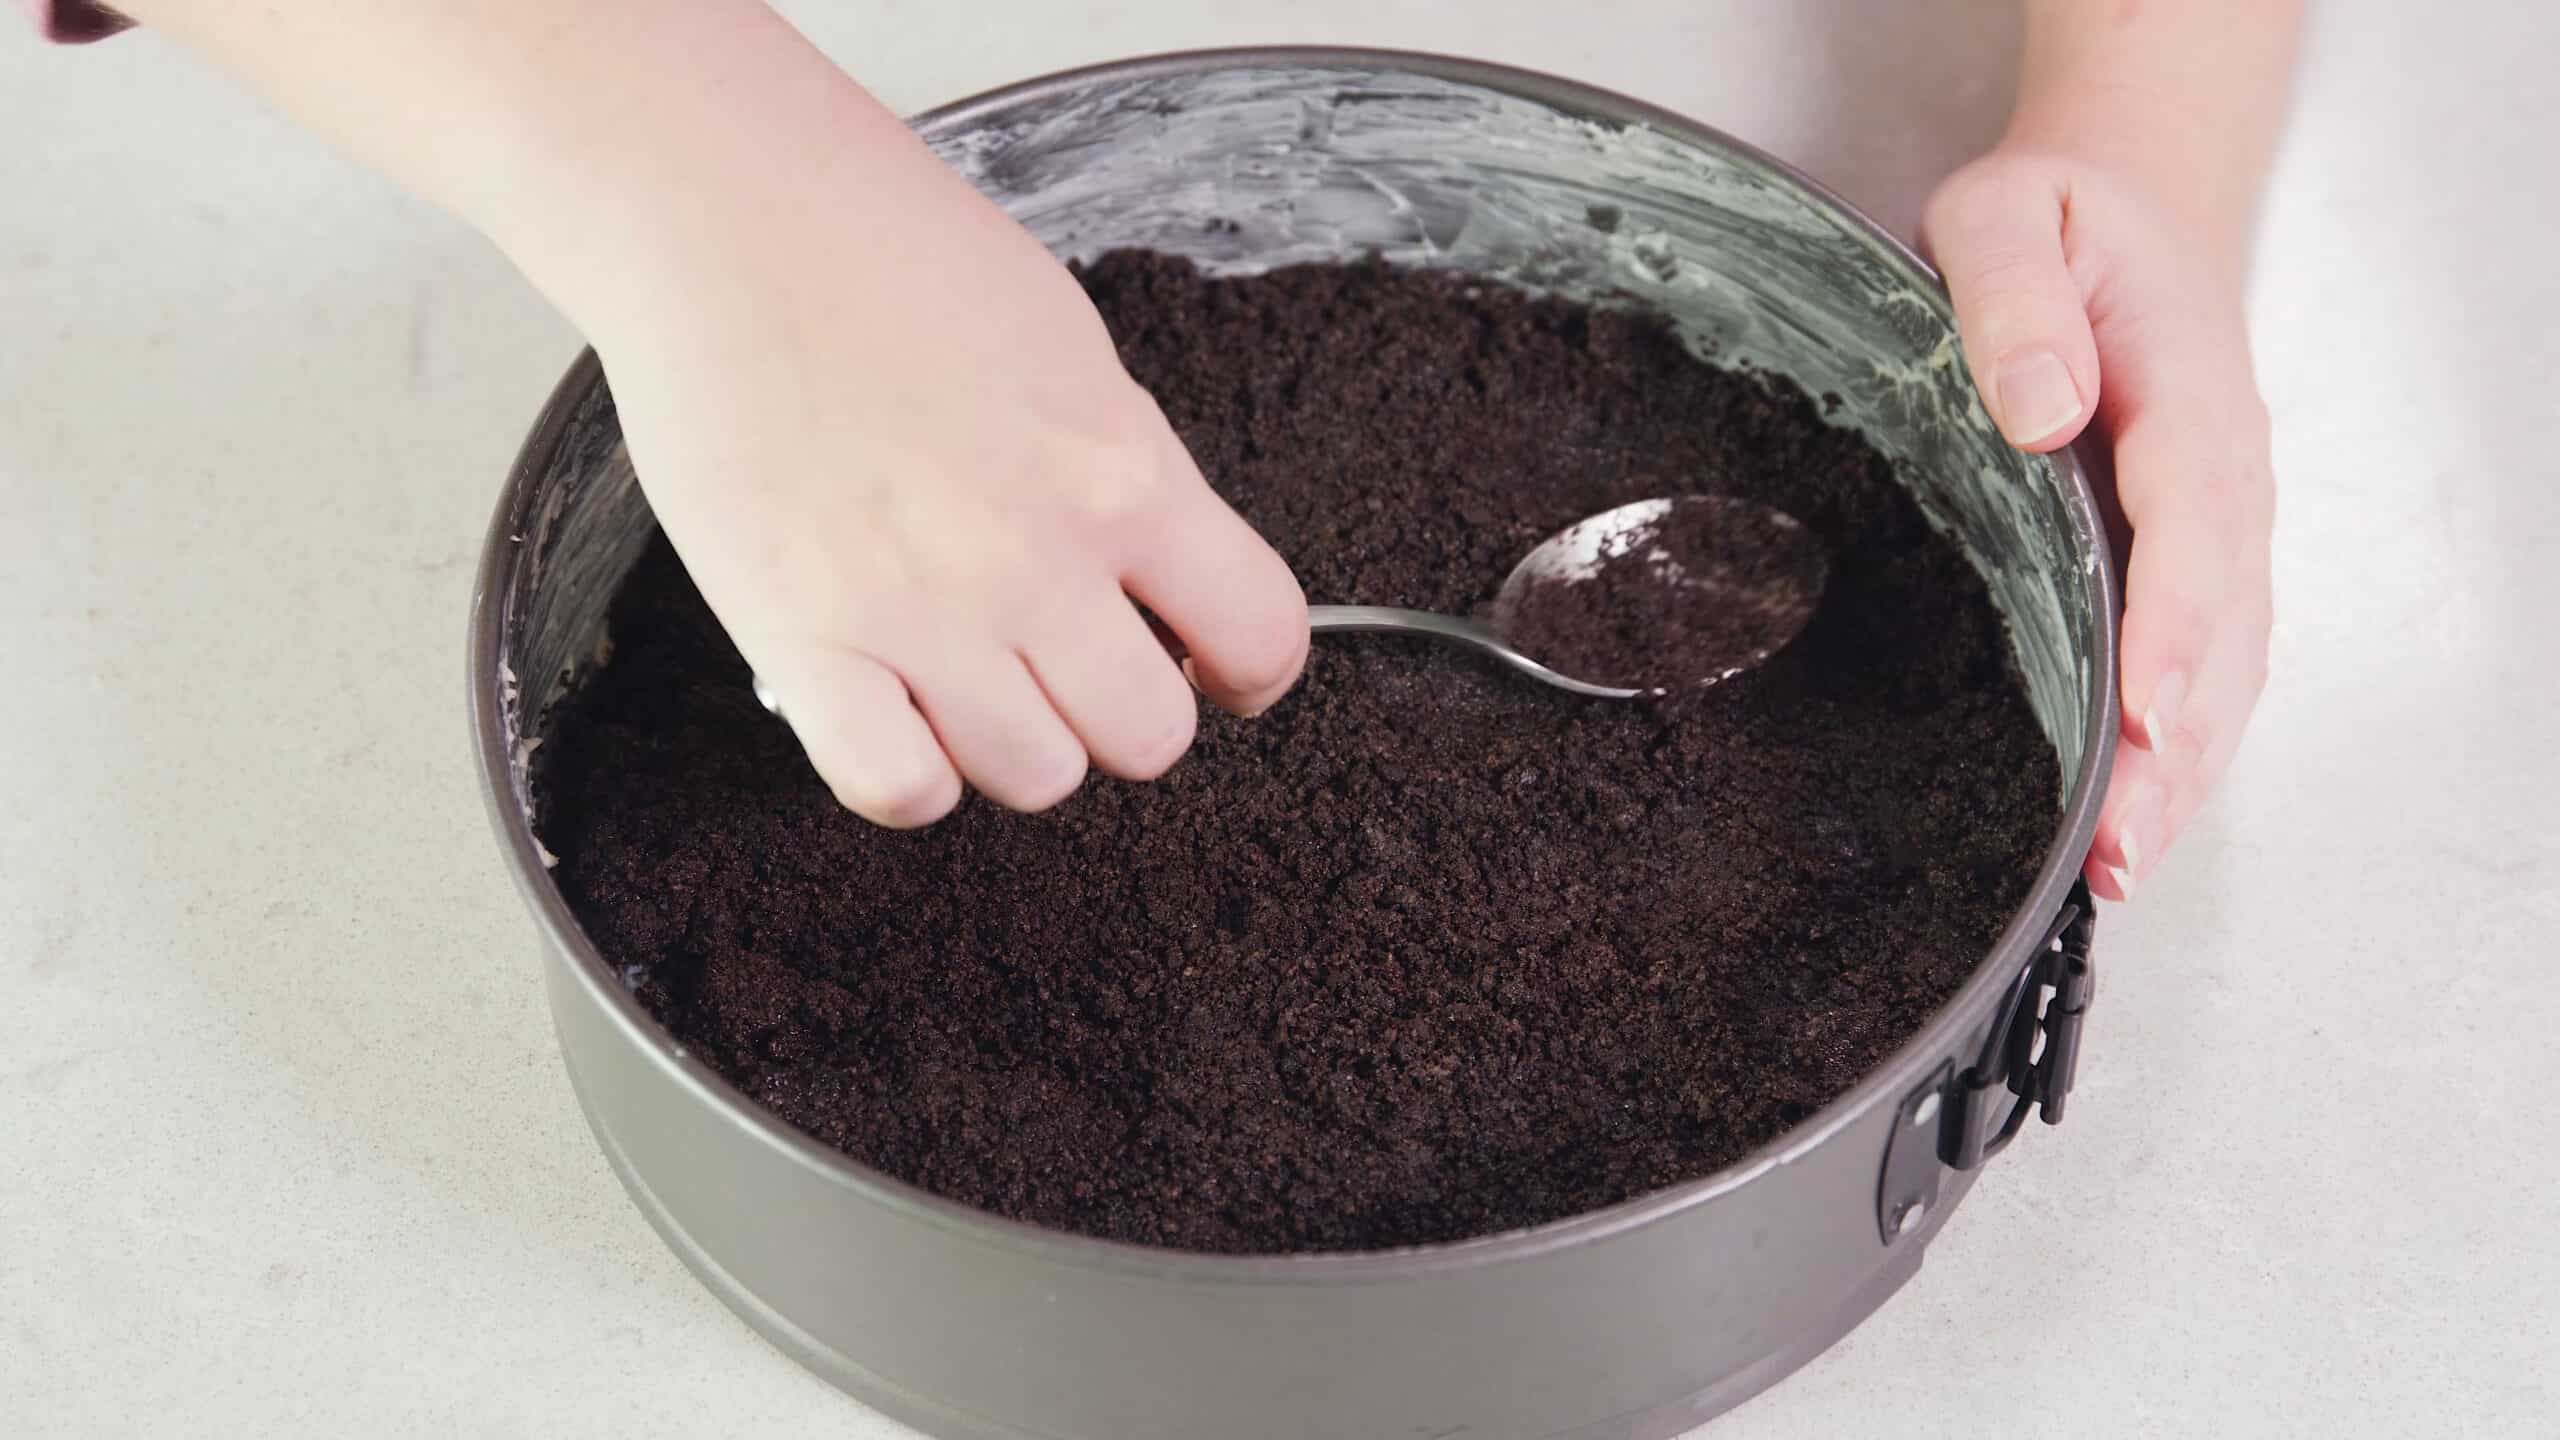 Overhead view of metal spring form pan greased with a stick of butter and the bottom coated in crushed Oreo cookies and pressed down with a metal spoon.